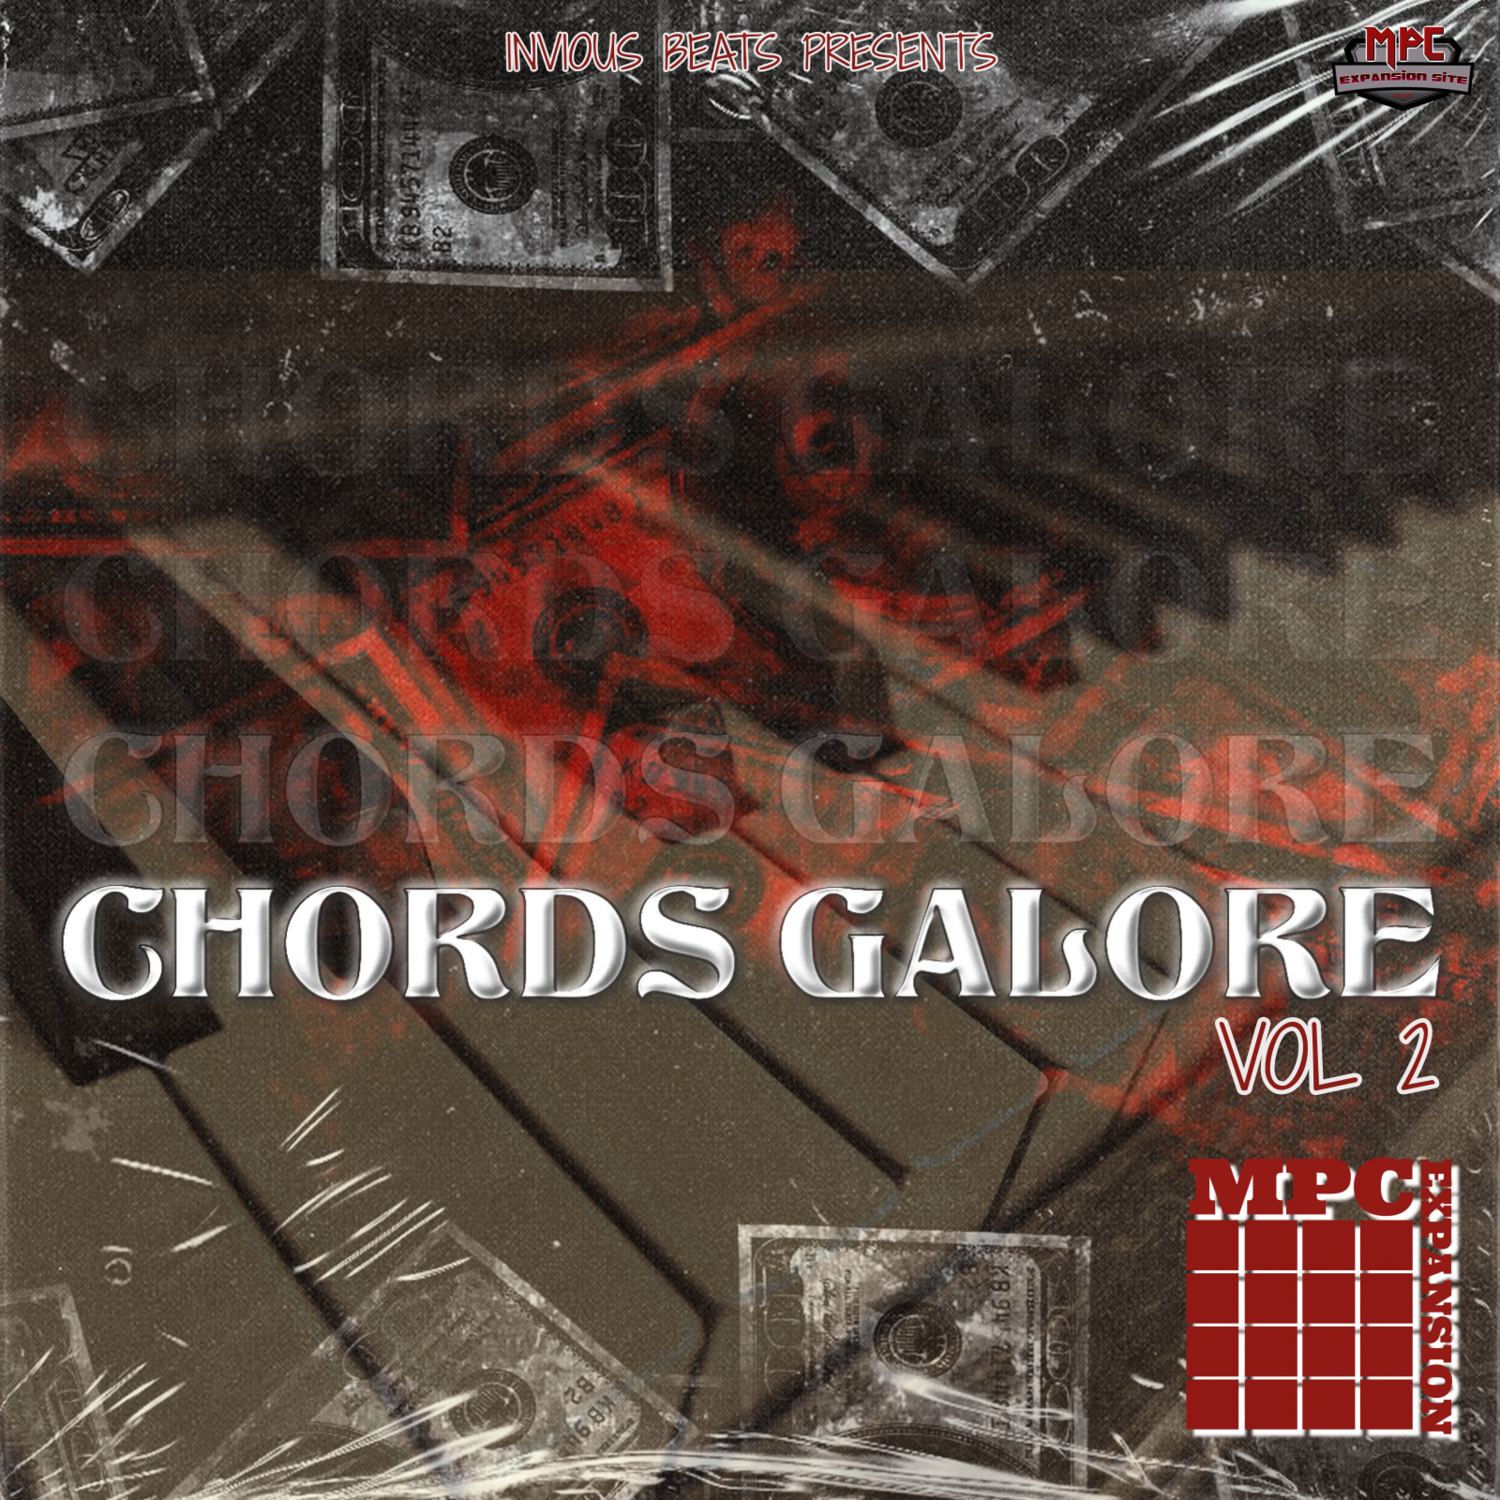 MPC EXPANSION 'CHORDS GALORE VOL 2' by INVIOUS